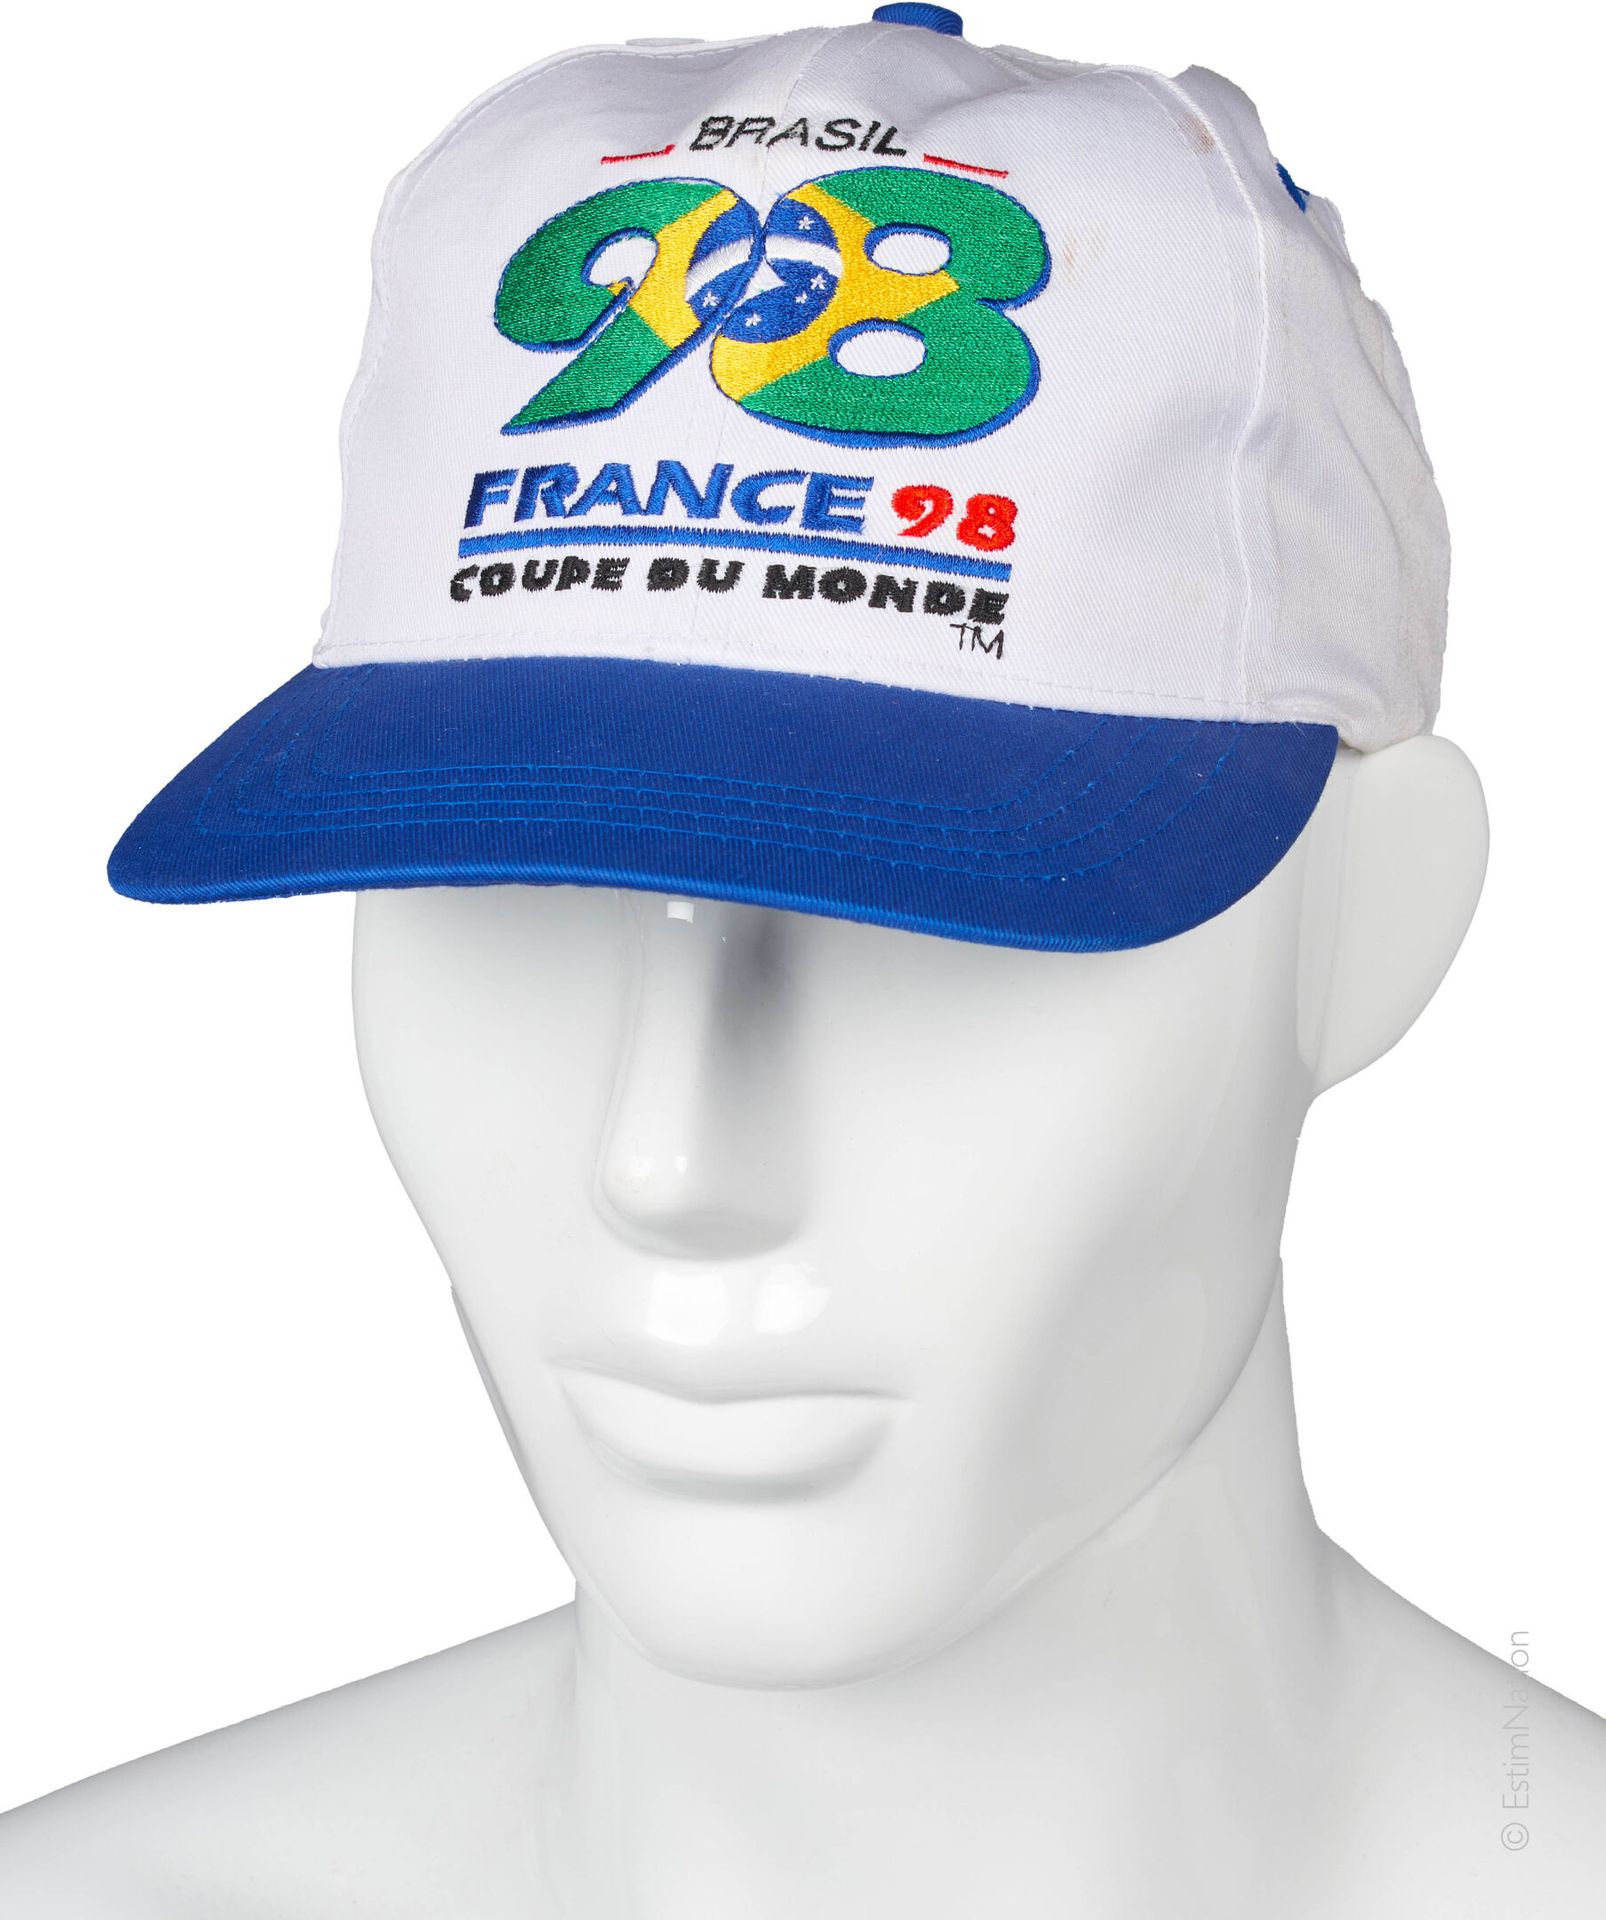 FIFA COUPE DU MONDE FRANCE 1998 FINALE Official cap of the Brazilian team for th&hellip;